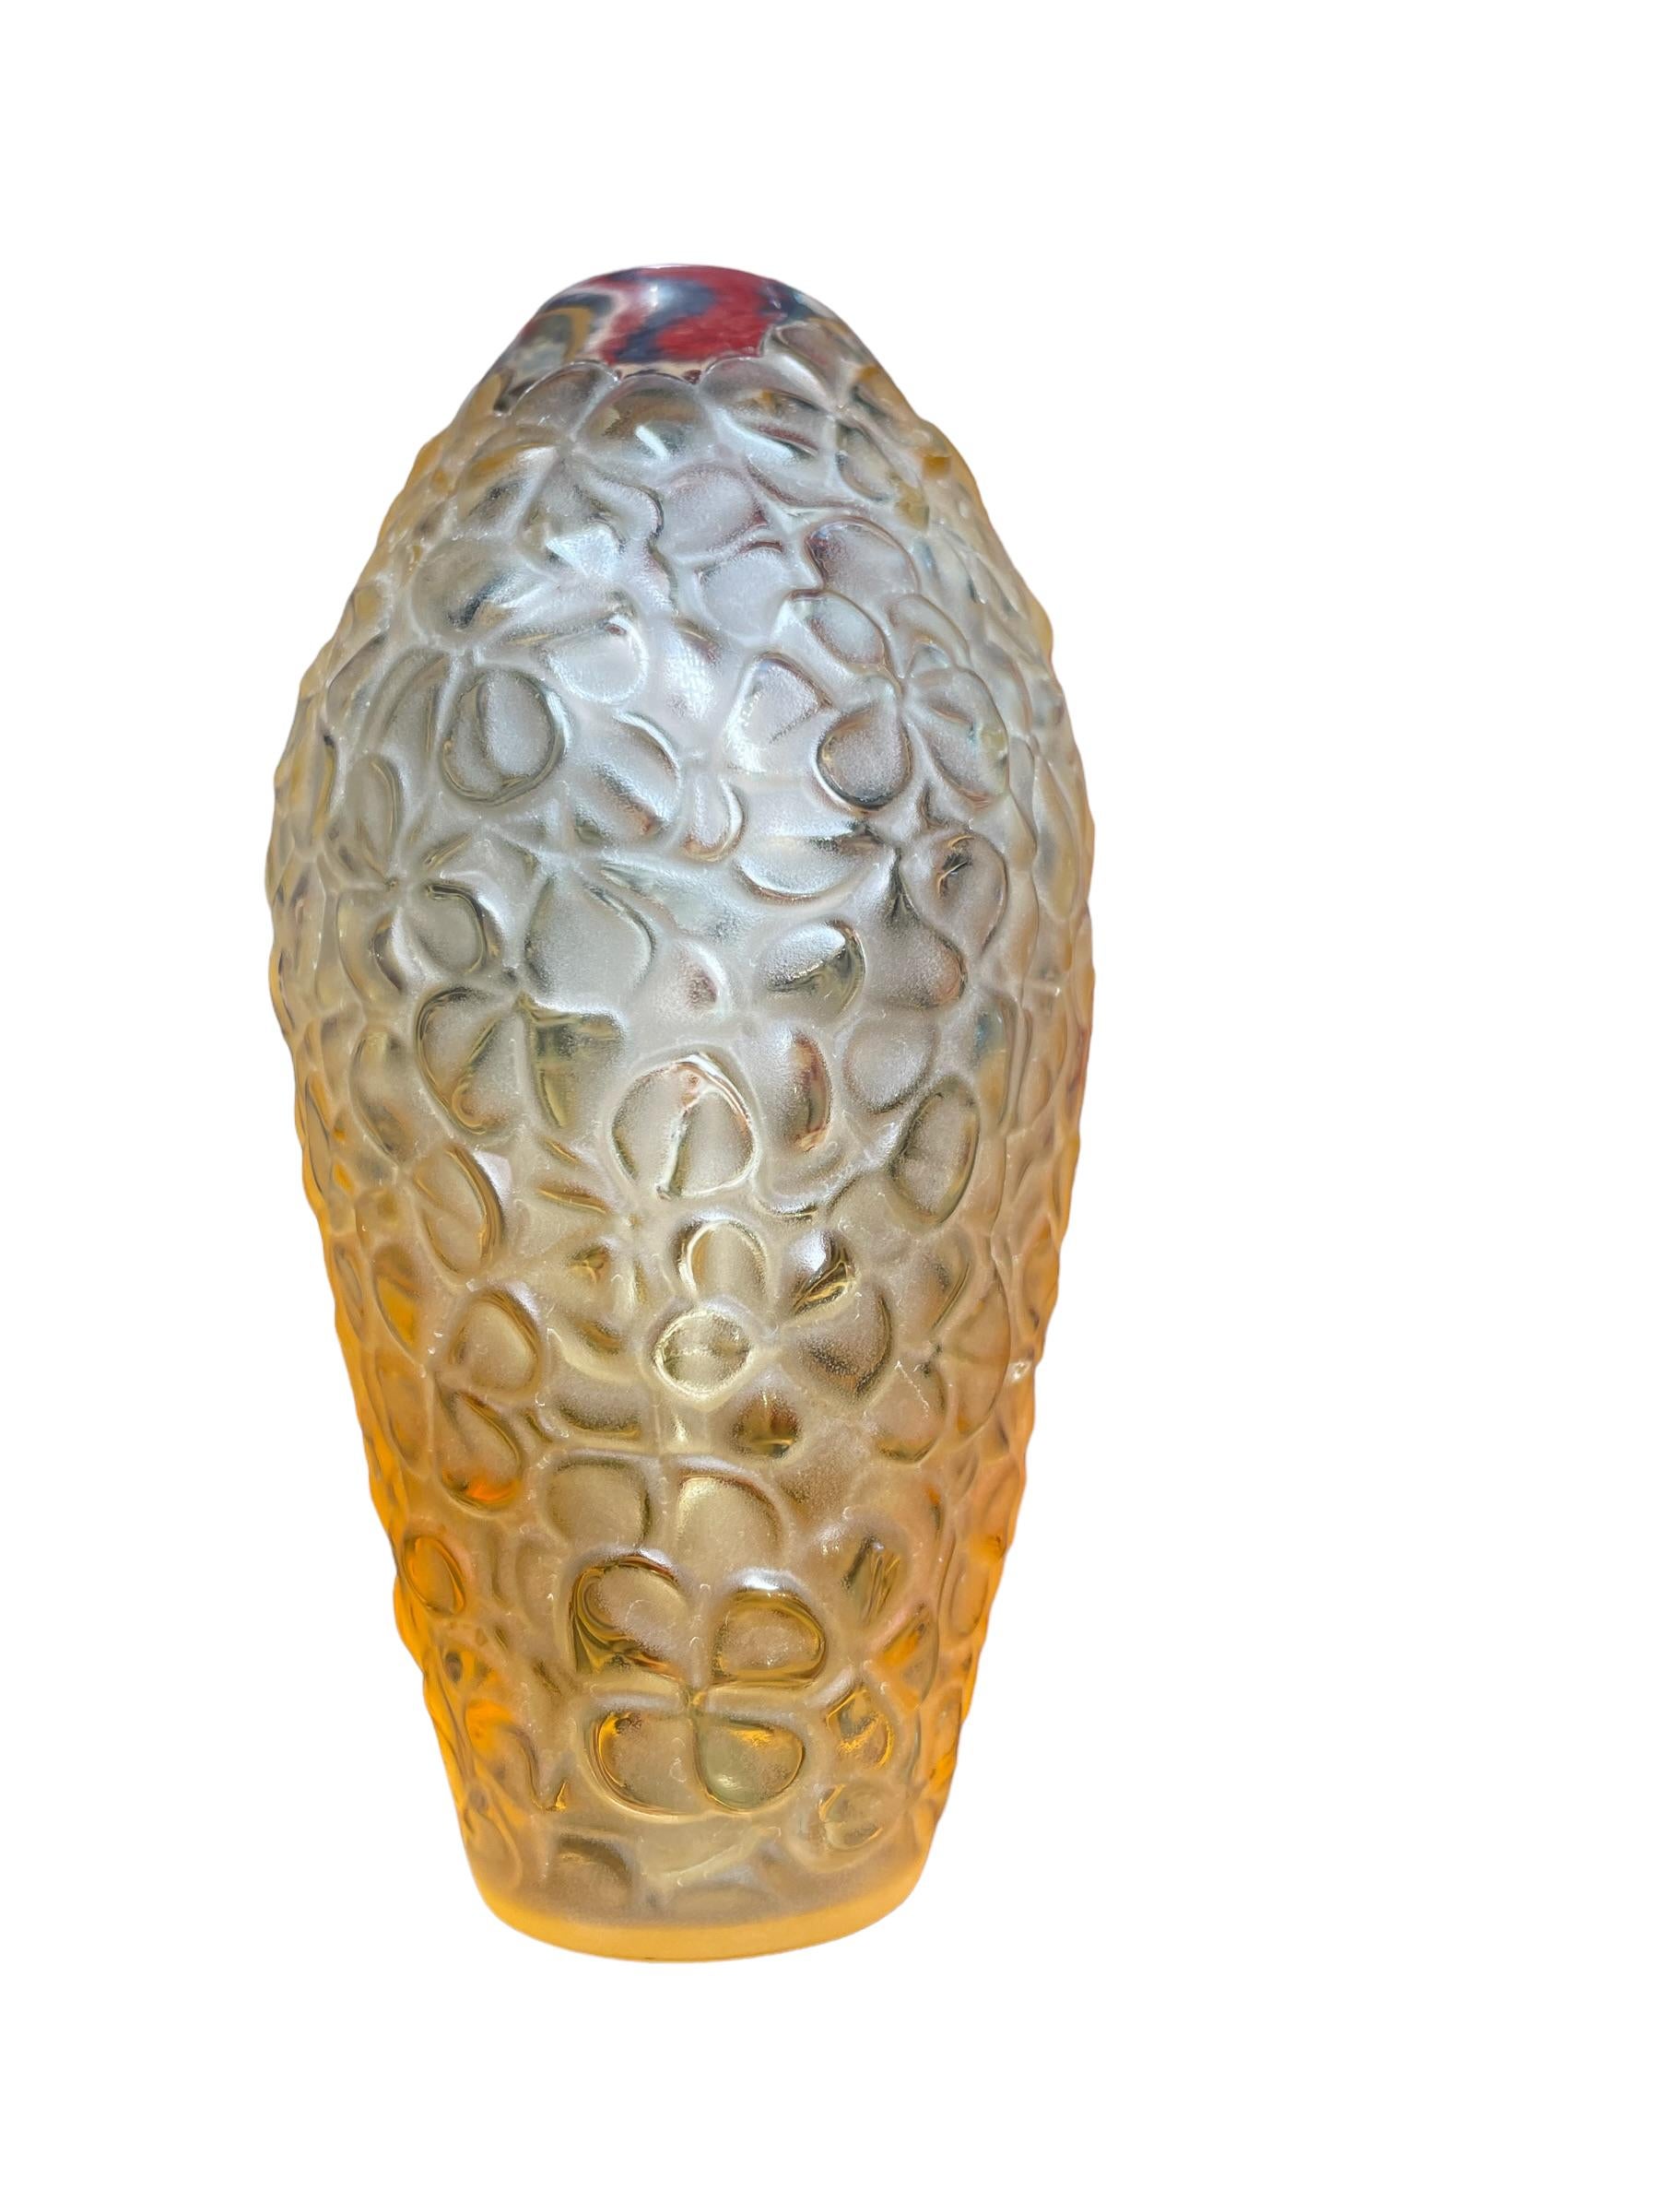 This is a Lalique Crystal “Violeta” clear to amberina color glass small flower vase. It depicts an elongated bulbous vase with multiple carved flowers. Below the base is the acid etched hallmark of Lalique, France.